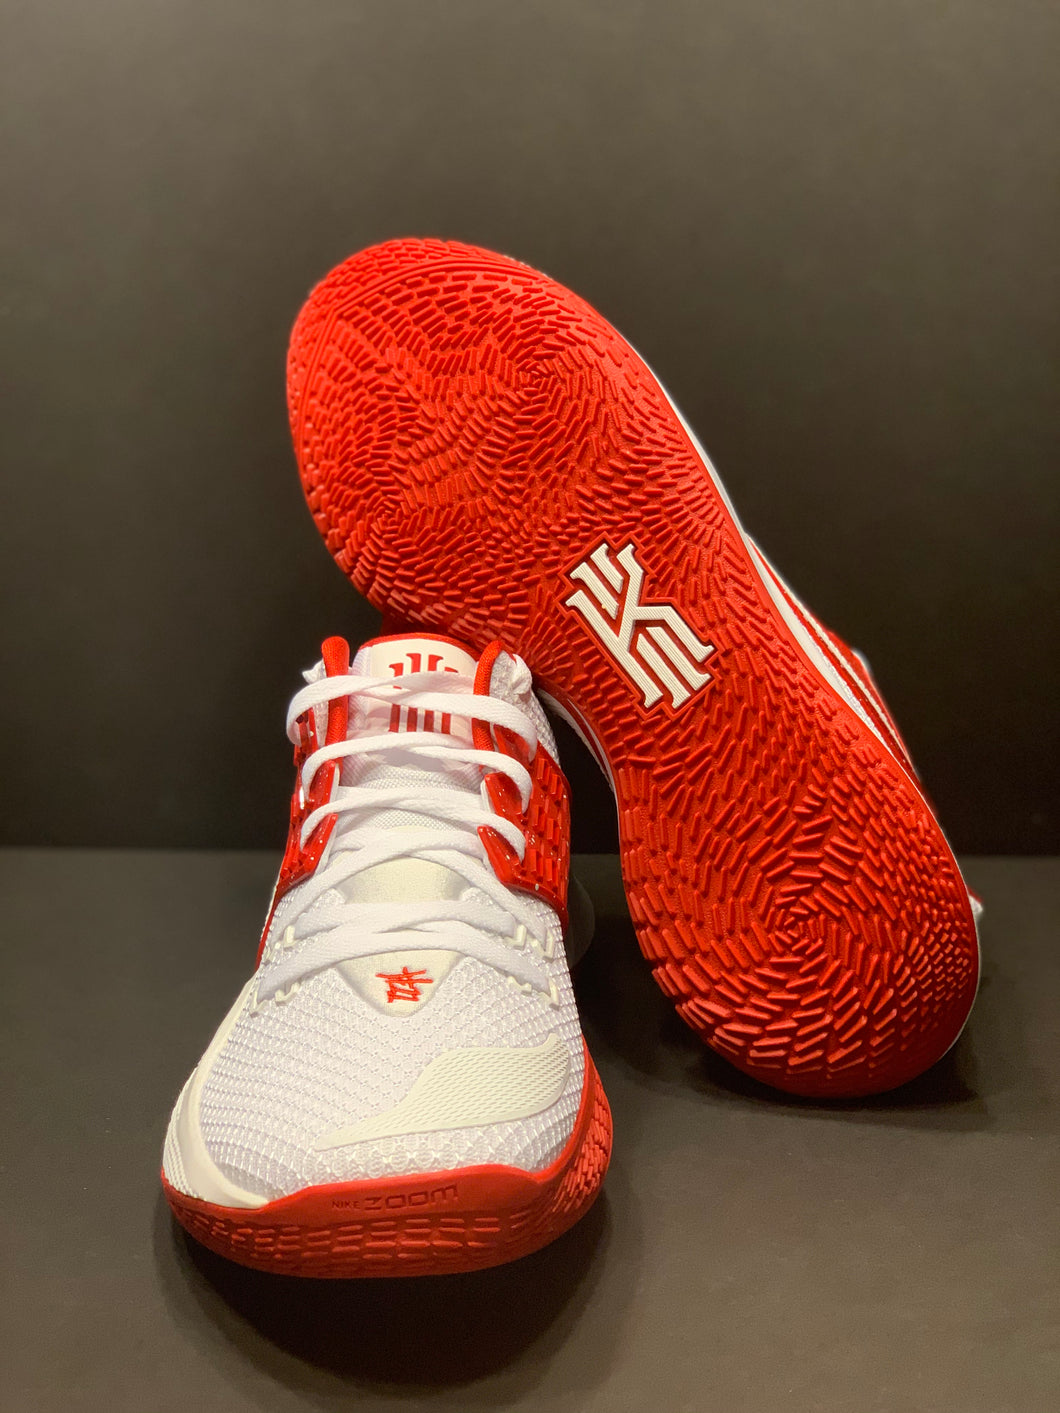 KYRIE LOW 2 TB PROMO (official Dragons team shoe)